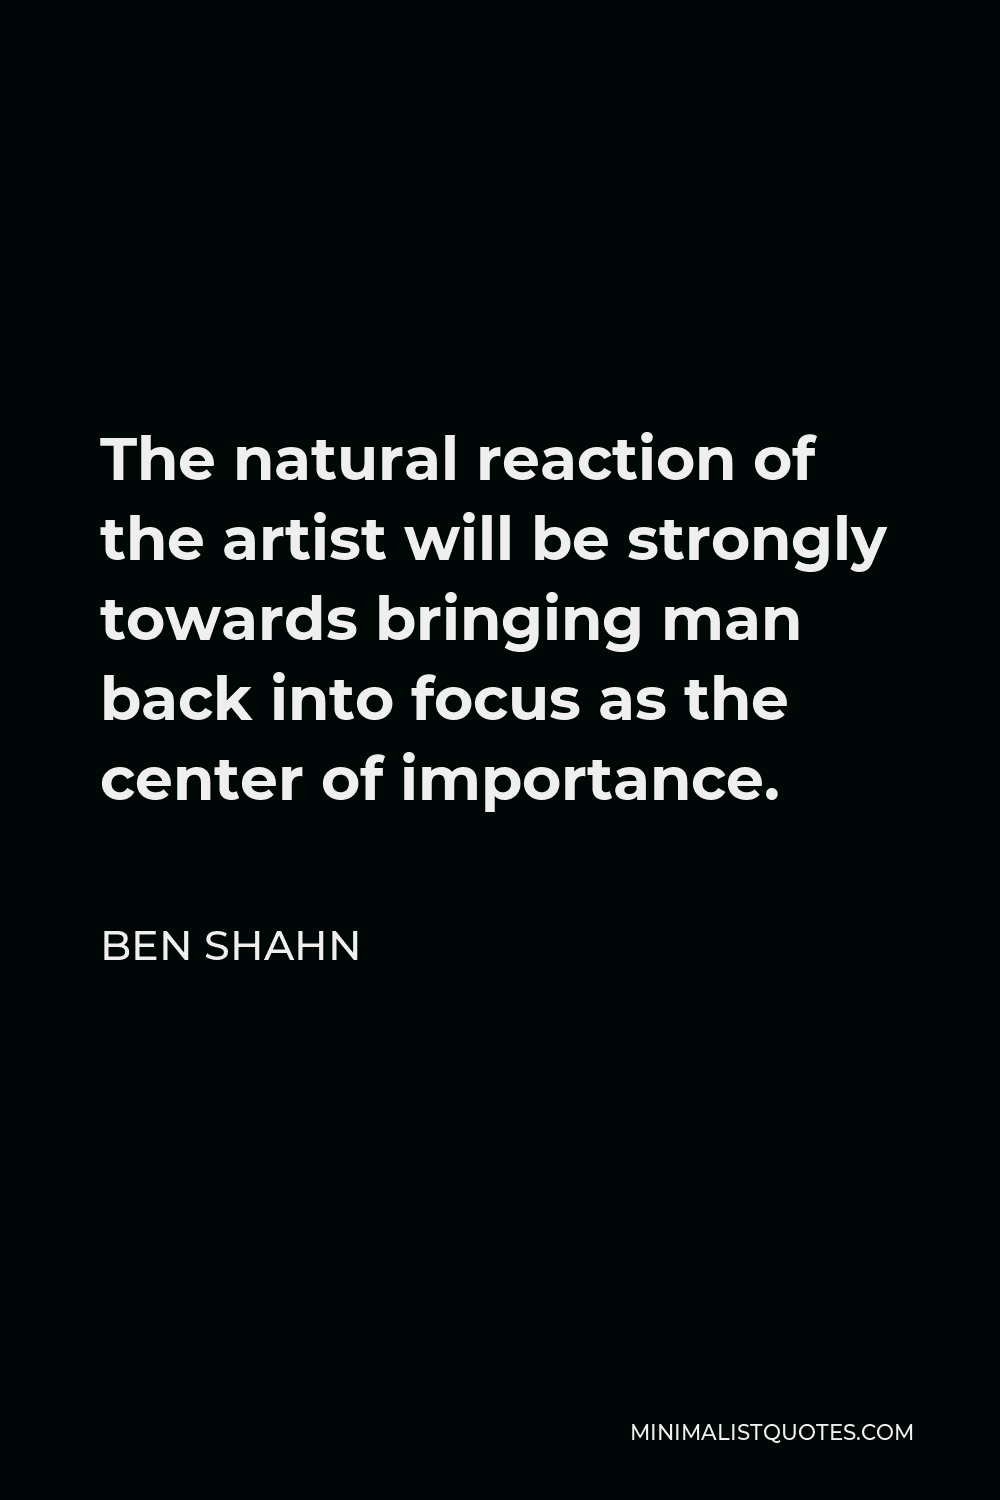 Ben Shahn Quote - The natural reaction of the artist will be strongly towards bringing man back into focus as the center of importance.